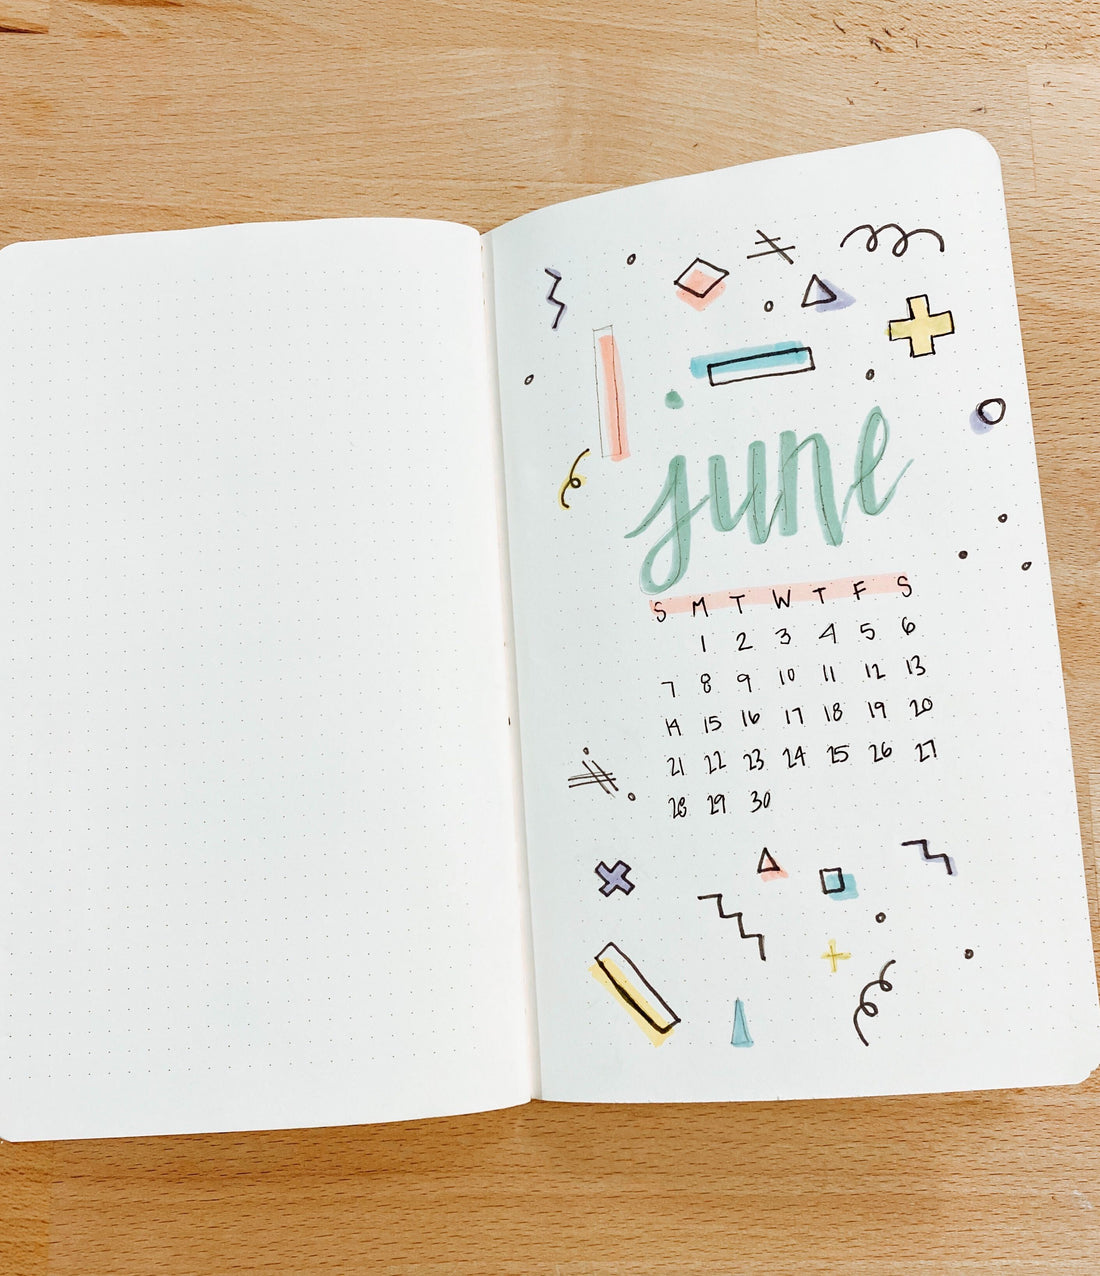 JOURNALING PROMPT FOR JUNE 19TH, 2020